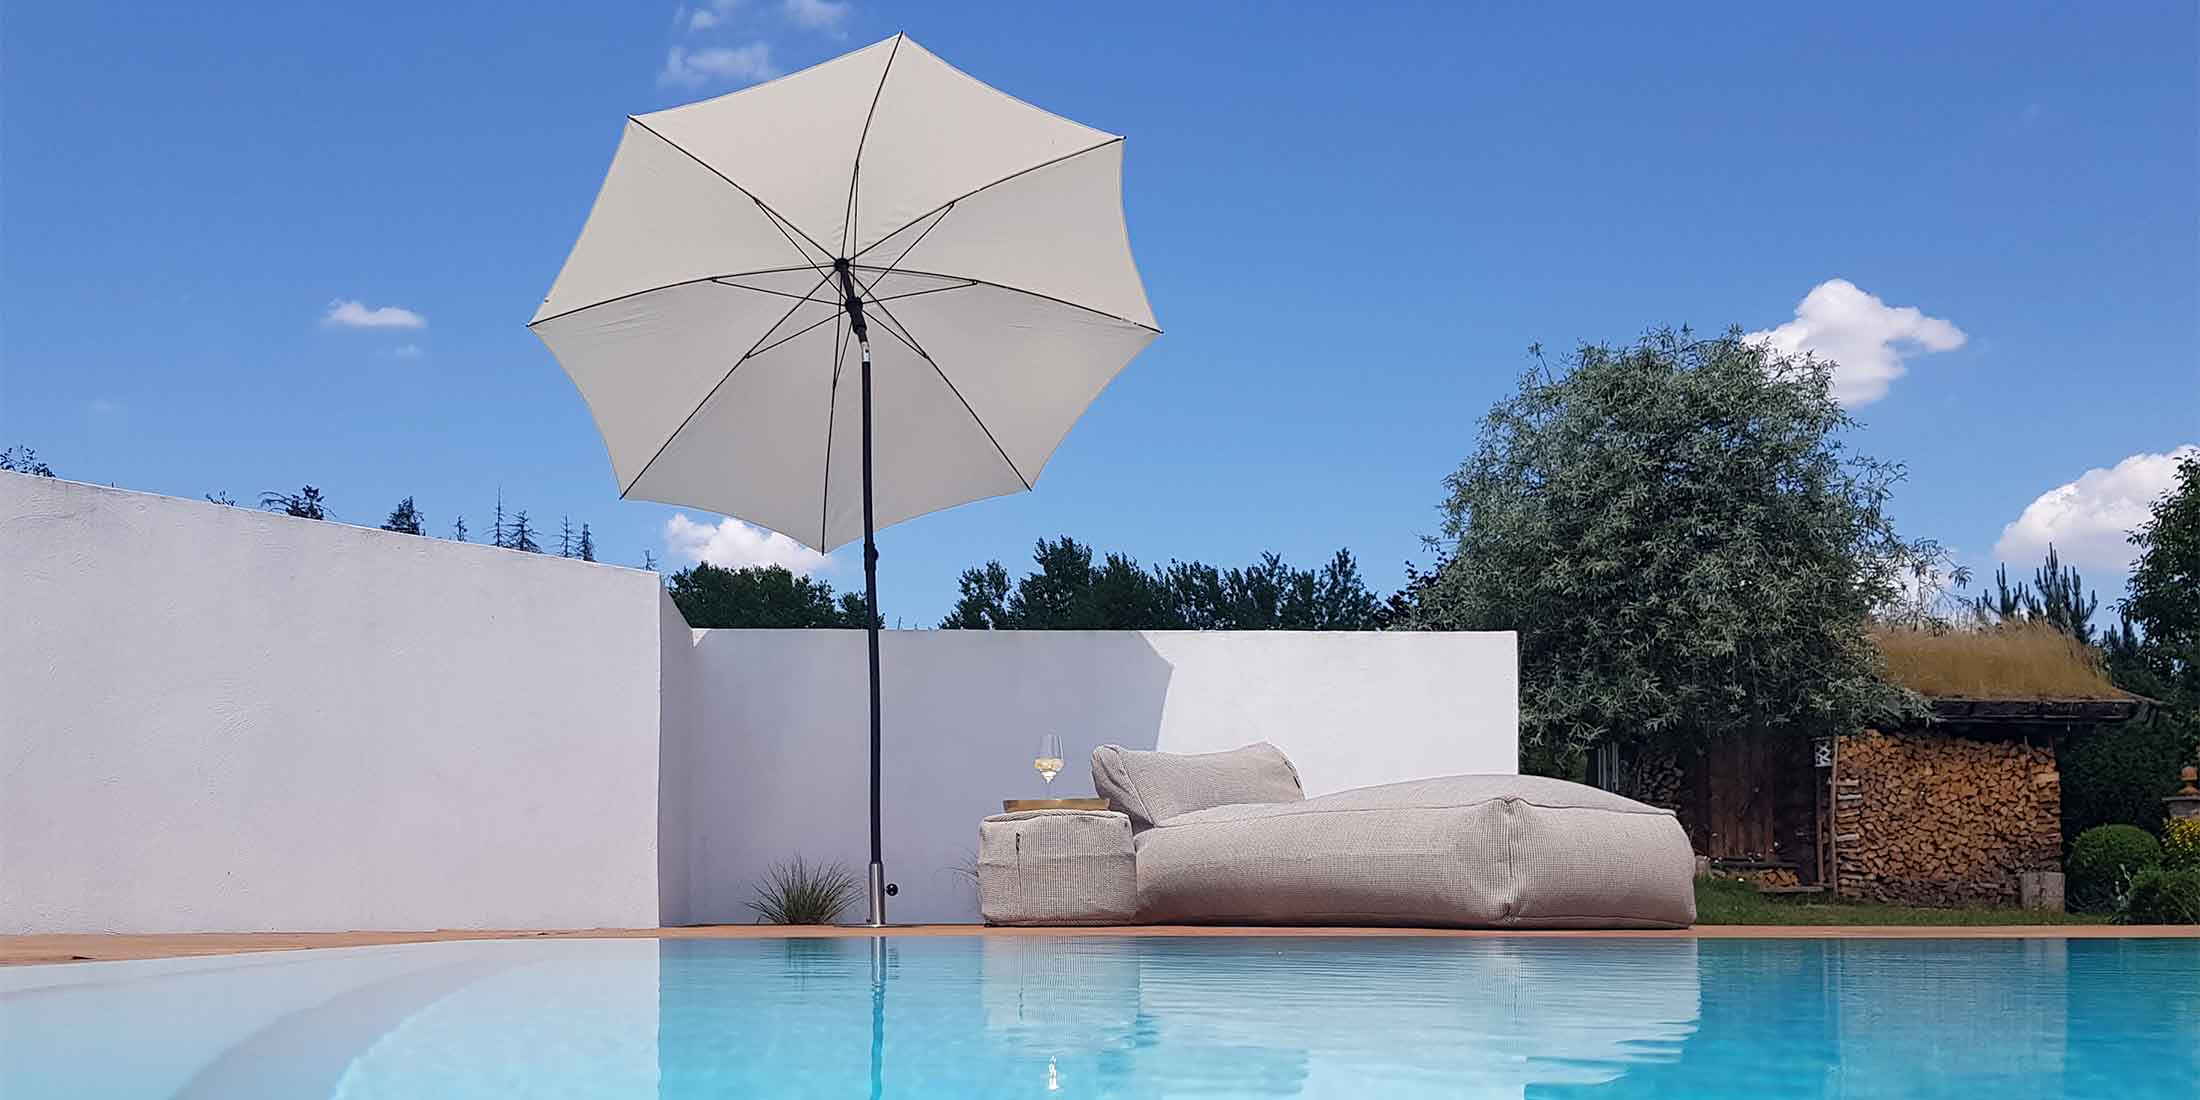 slide-sonnenanker-anchor-base-parasol-sun-umbrella-stand-stainless-steel-round-disc-wooden-deck-terrace-pool